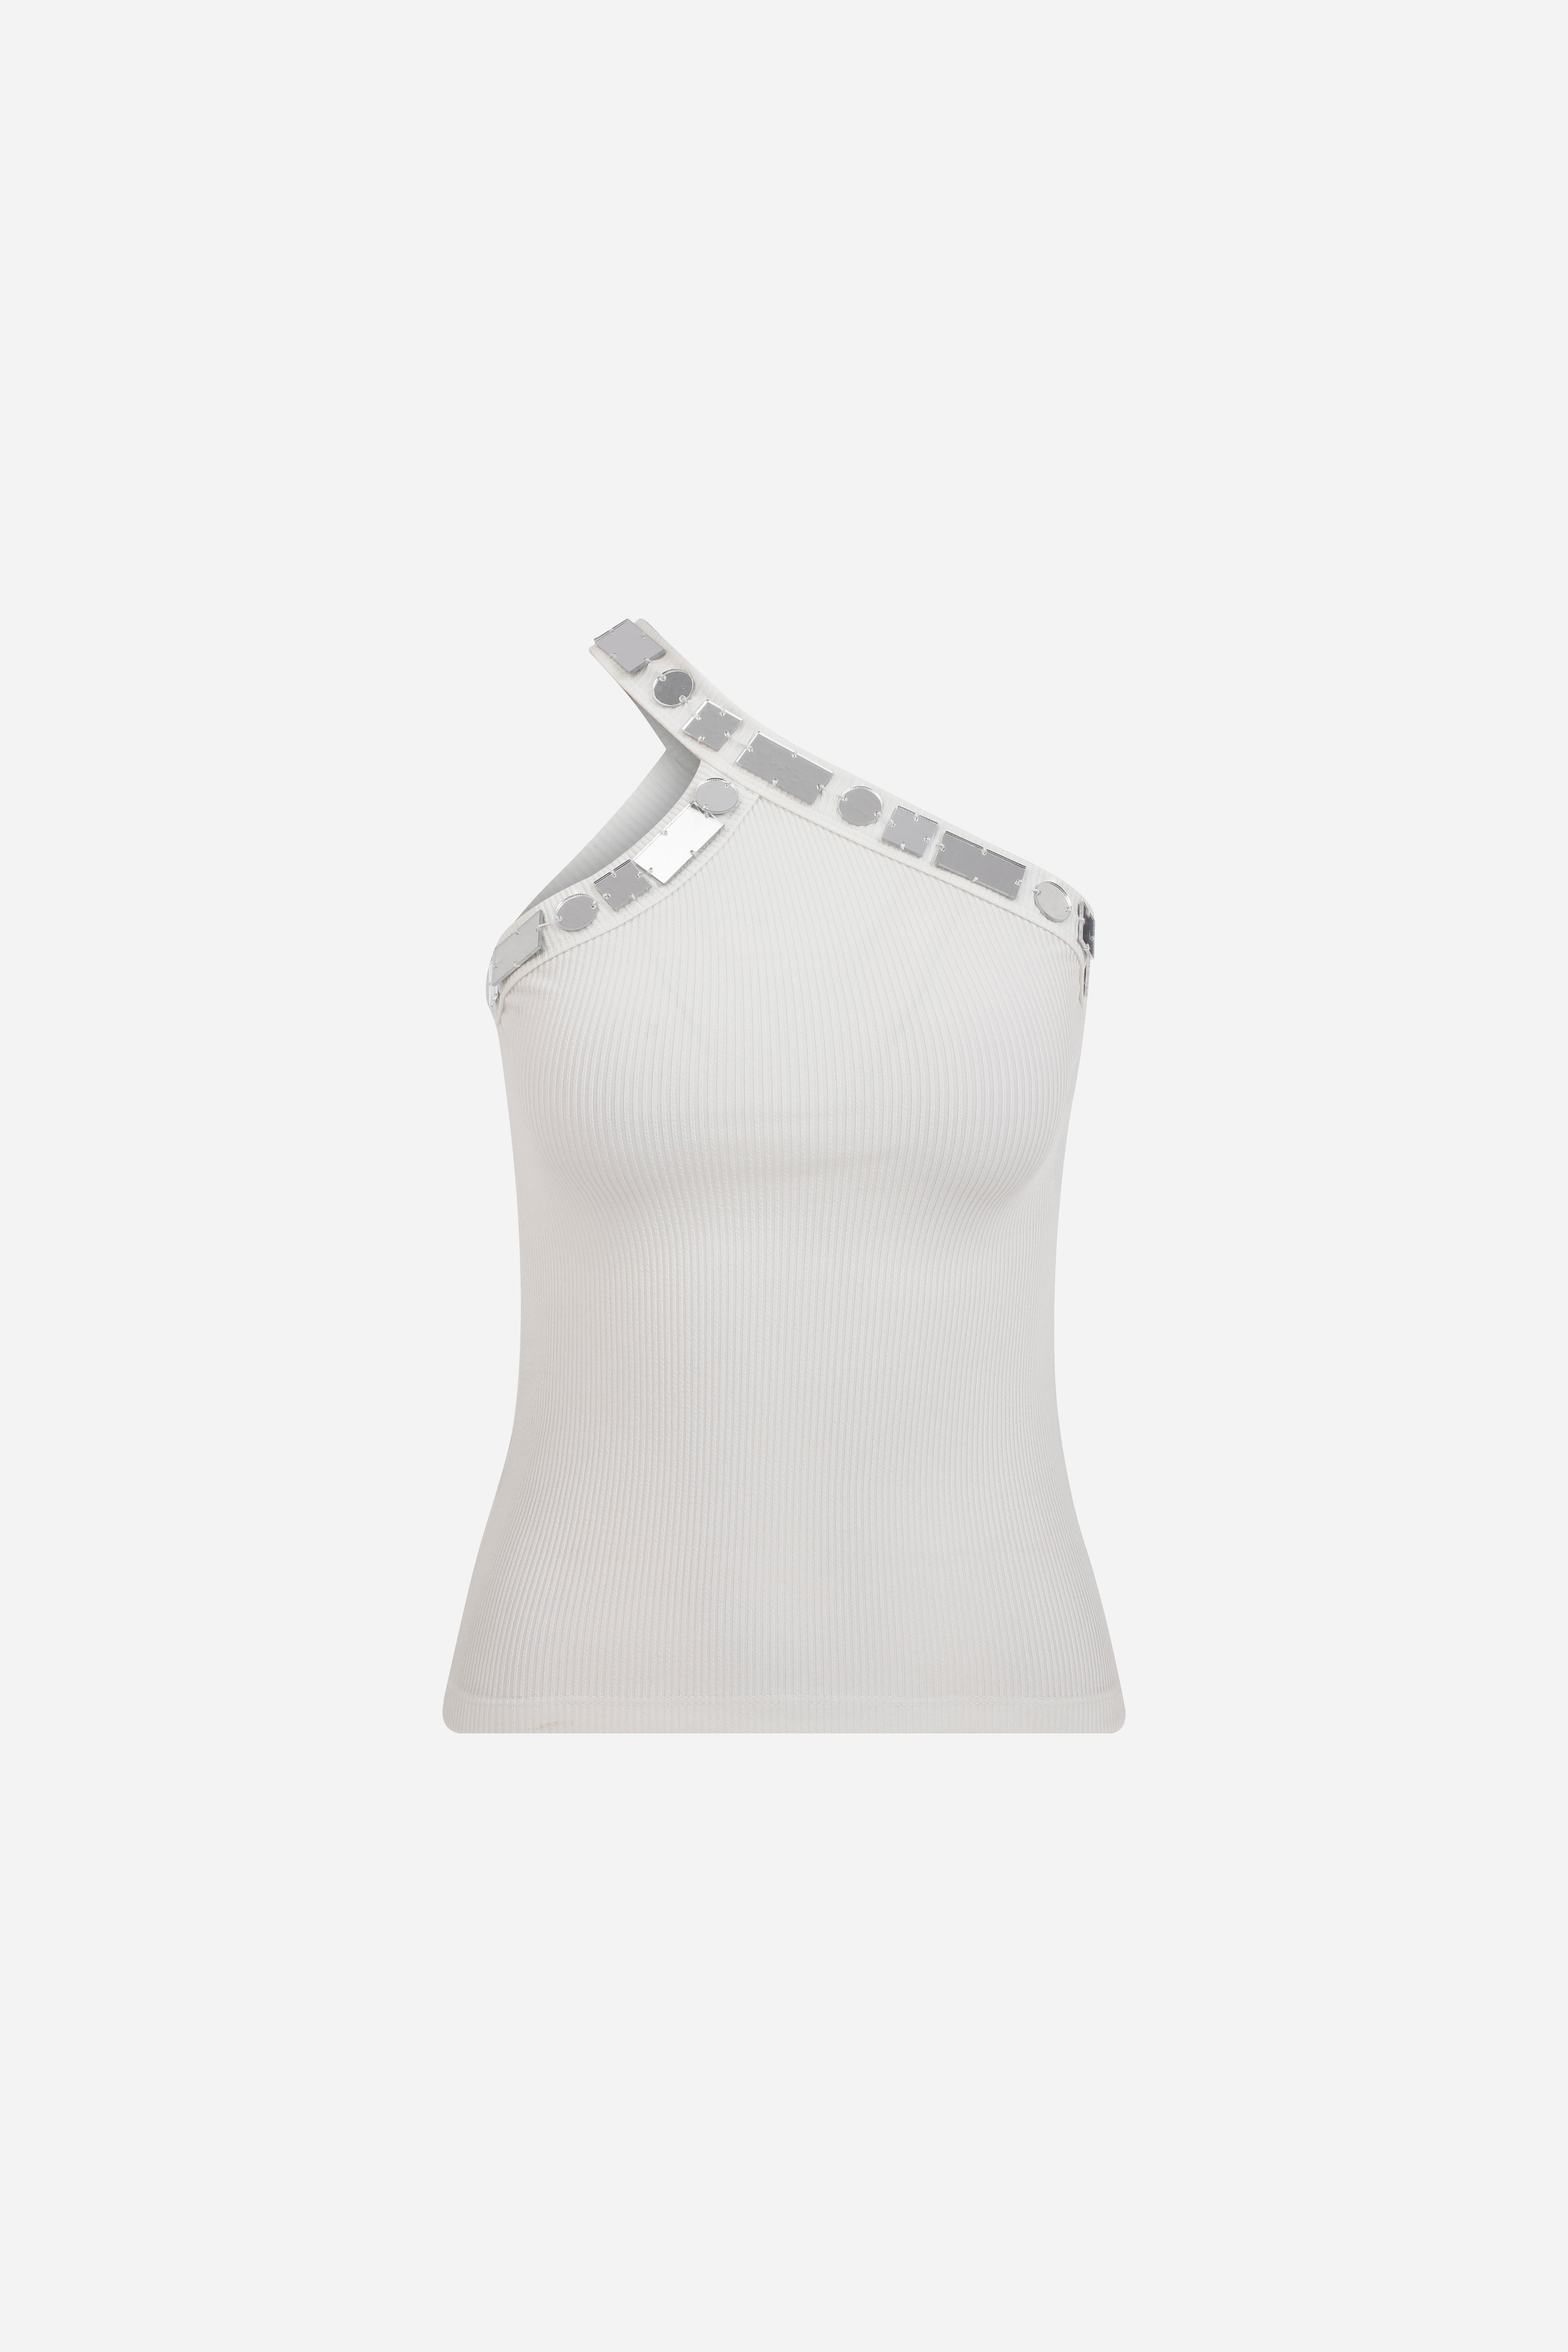 VANESSA - ONE SHOULDER TANK TOP WITH HAND STITCHED MIRRORS in WHITE